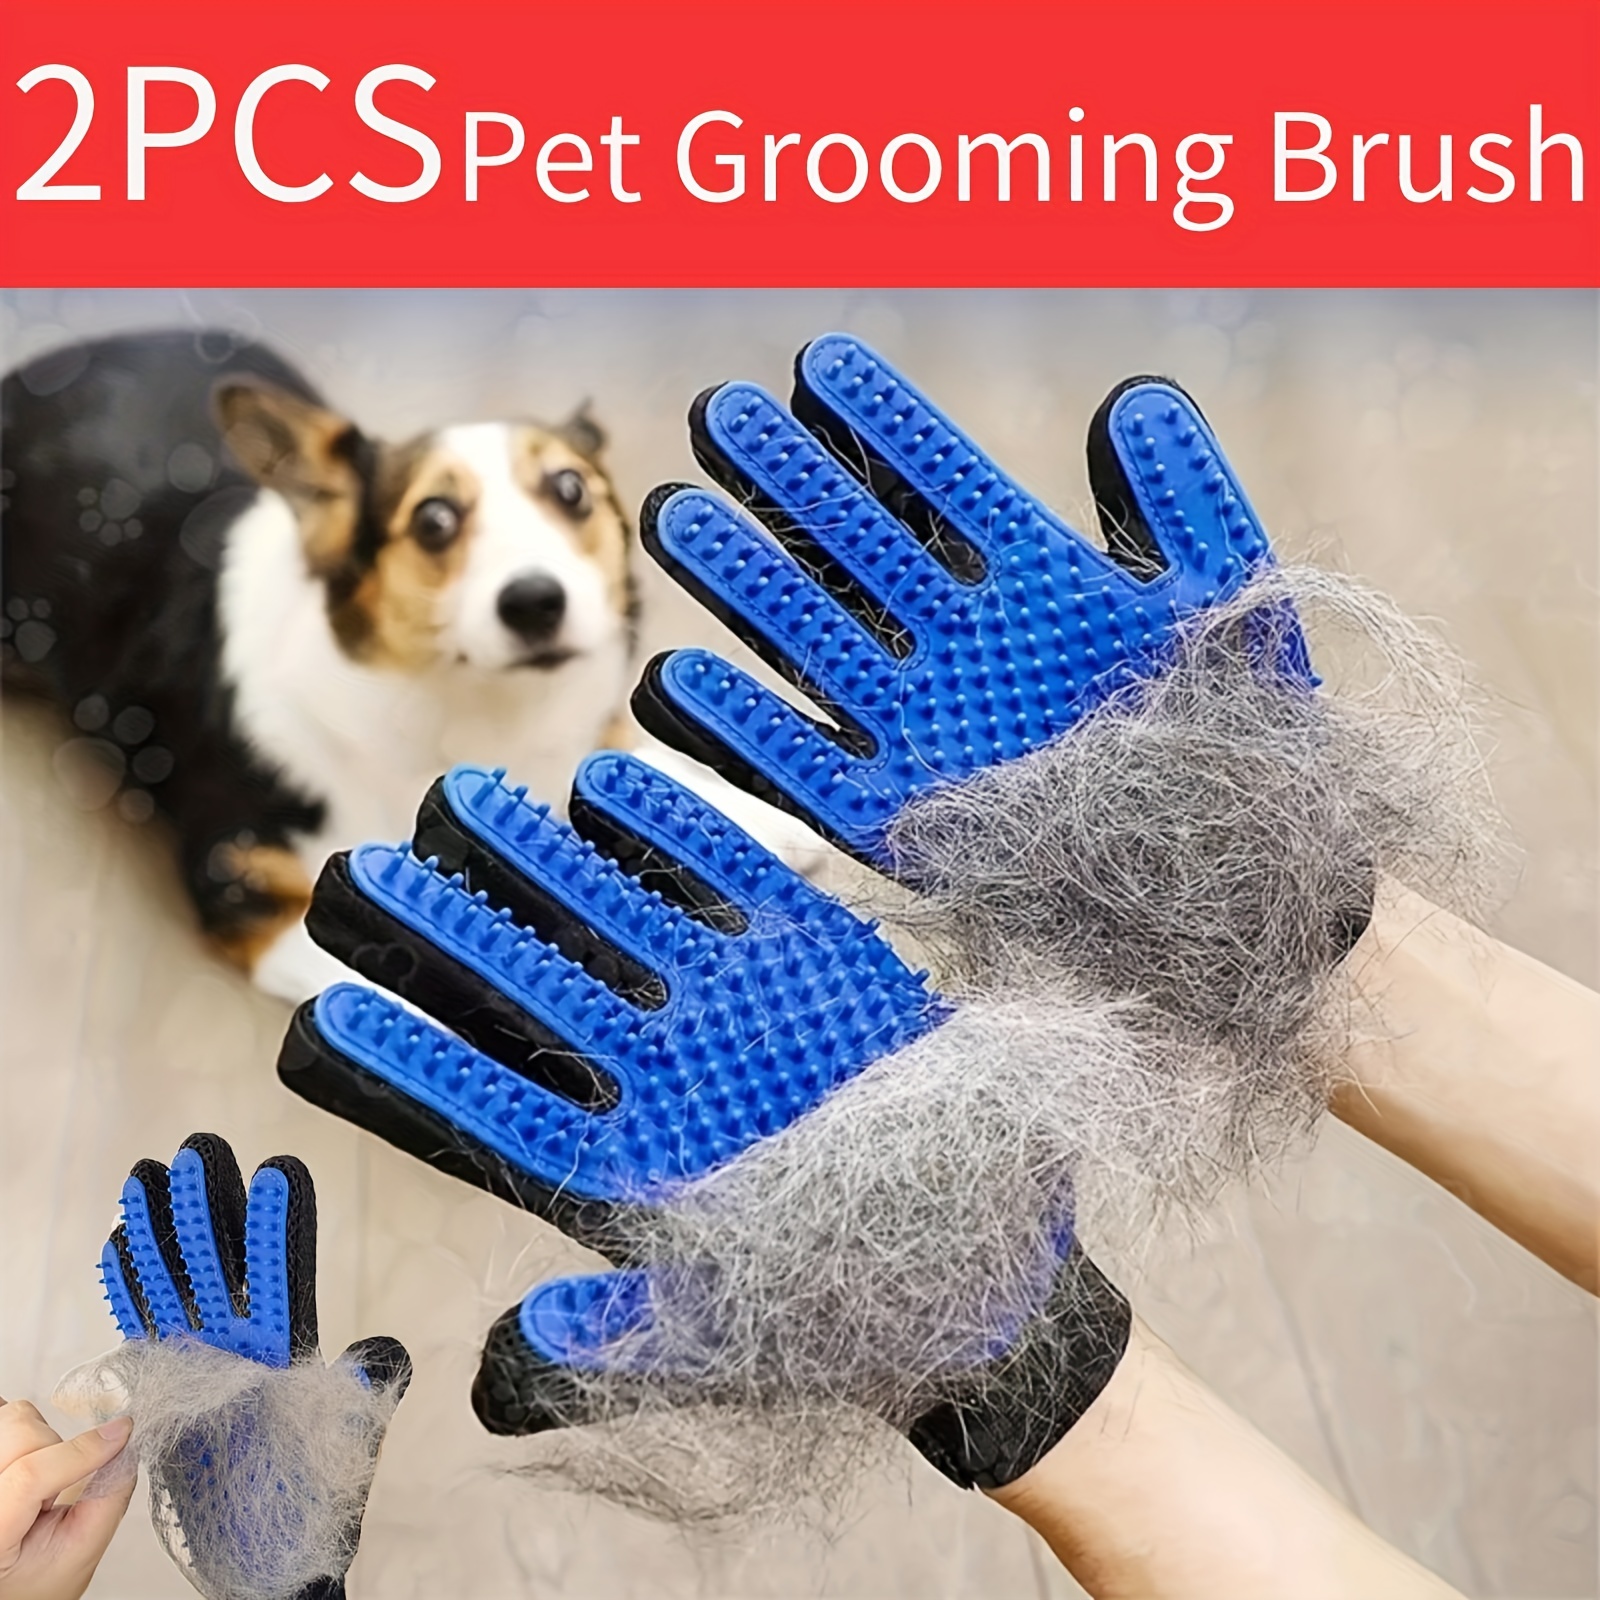 

2pcs 2-in-1 Pet Grooming Glove Brush For Dogs And Cats - Fur And Hair Removal Mitt With Massage And Deshedding Benefits